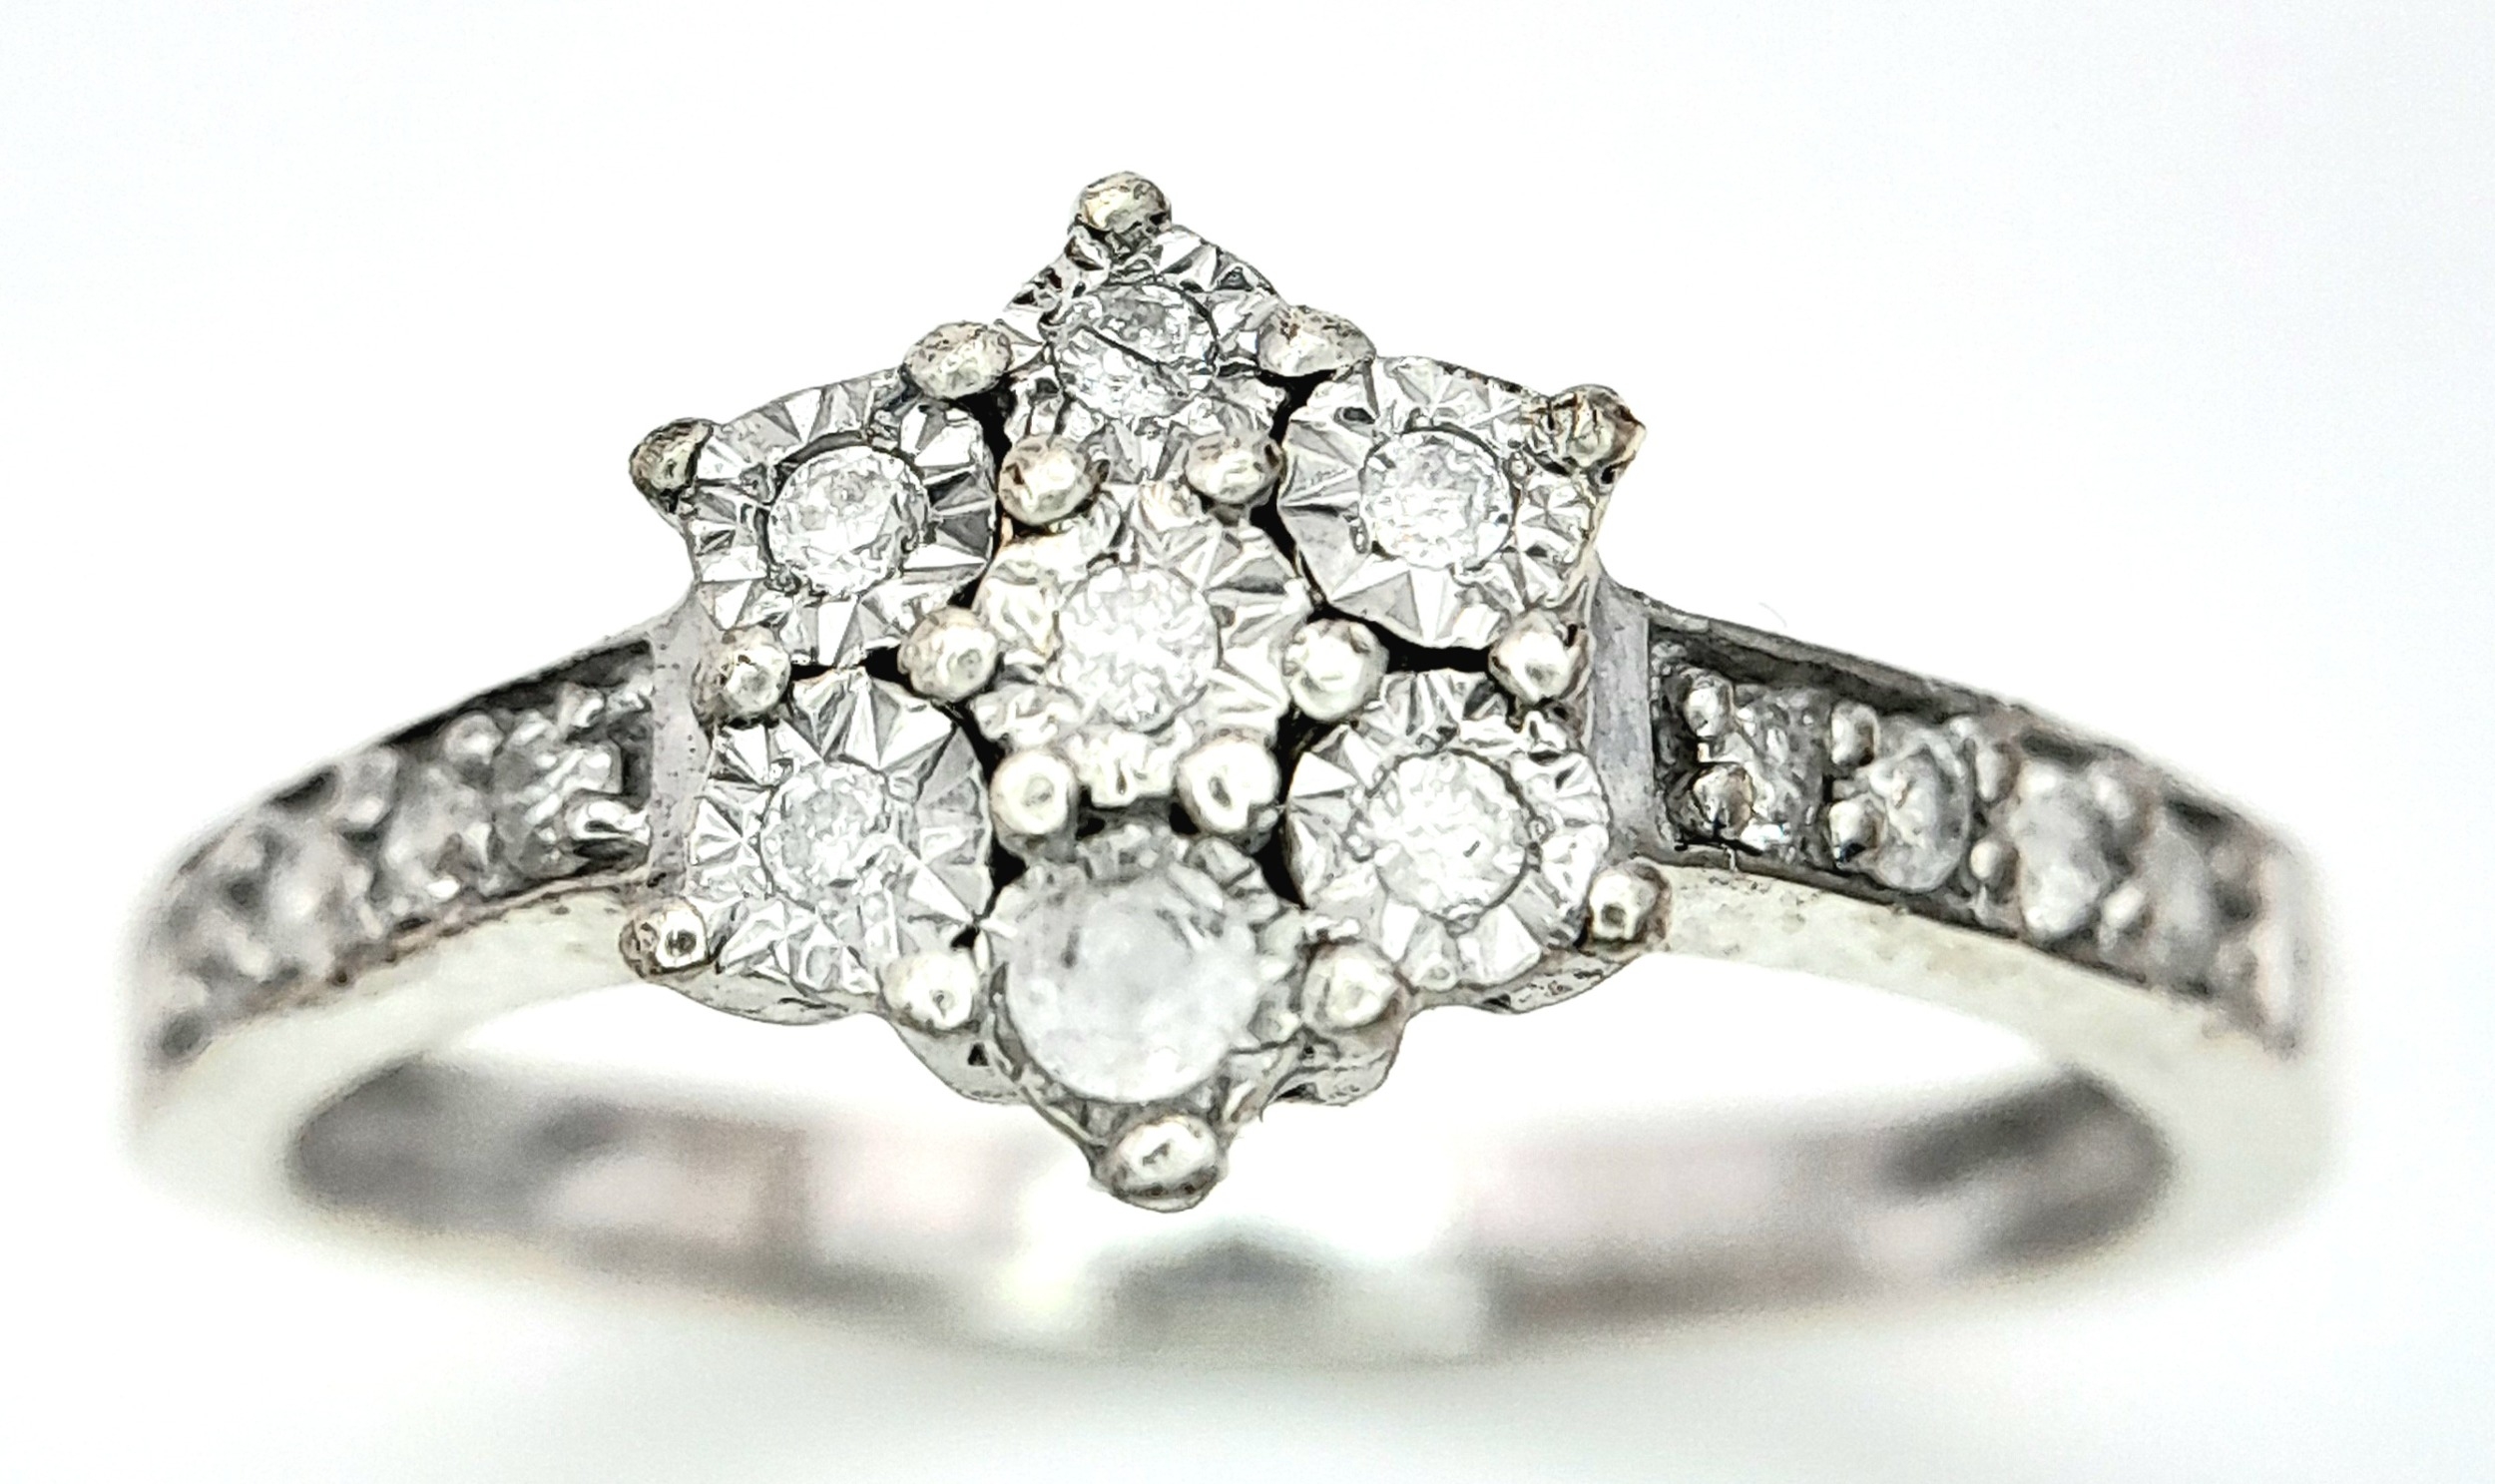 A 9K WHITE GOLD DIAMOND RING. Size M, 2.5g total weight. Ref: SC 8019 - Image 3 of 6